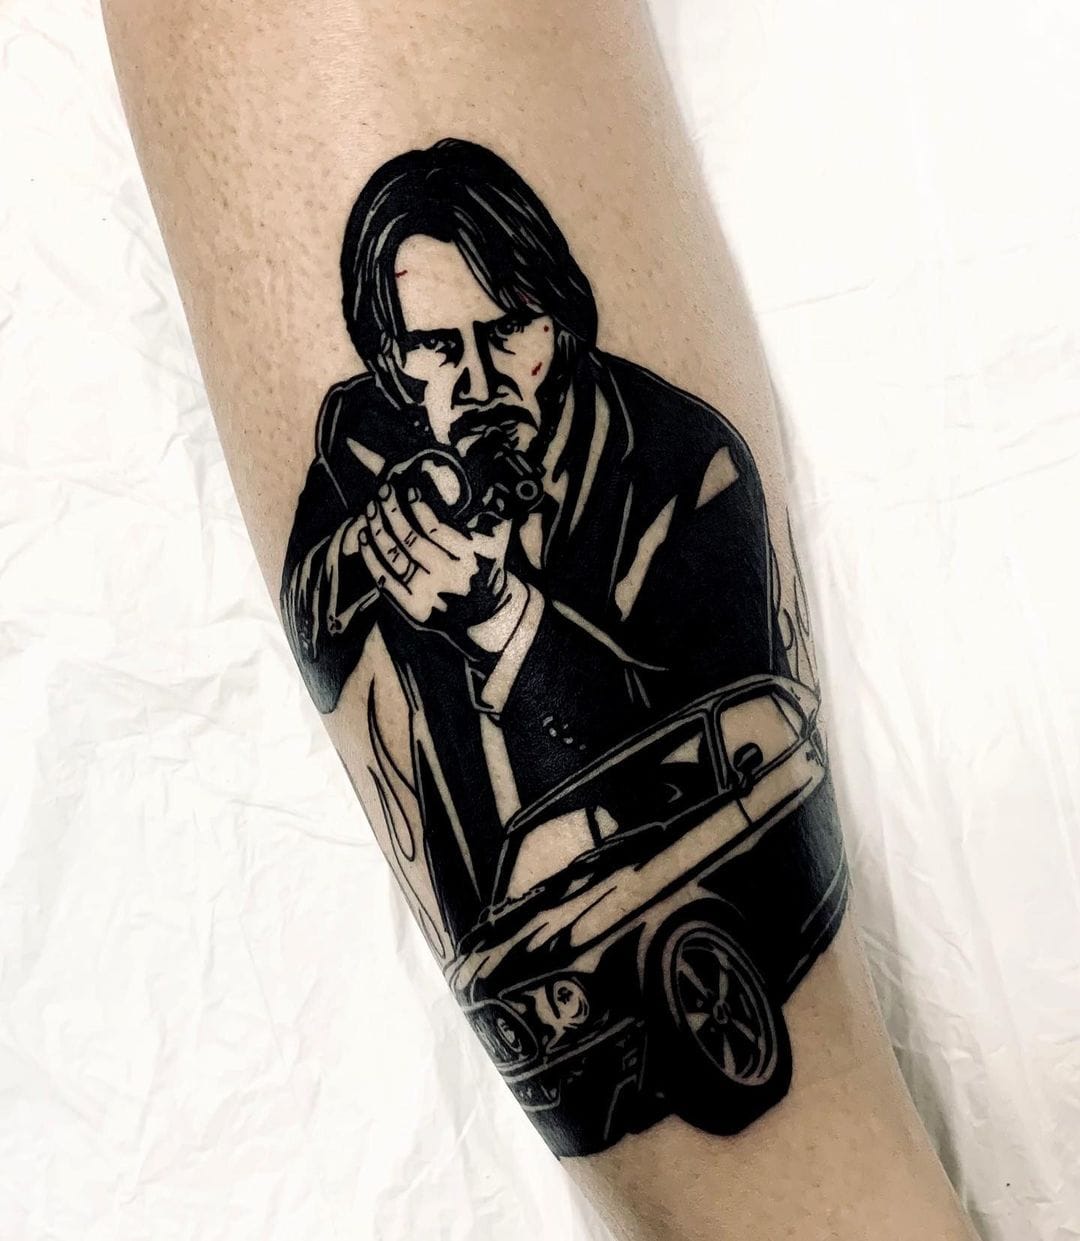 What Is The Meaning Of John Wick Tattoo Fortis Fortuna Adiuvat